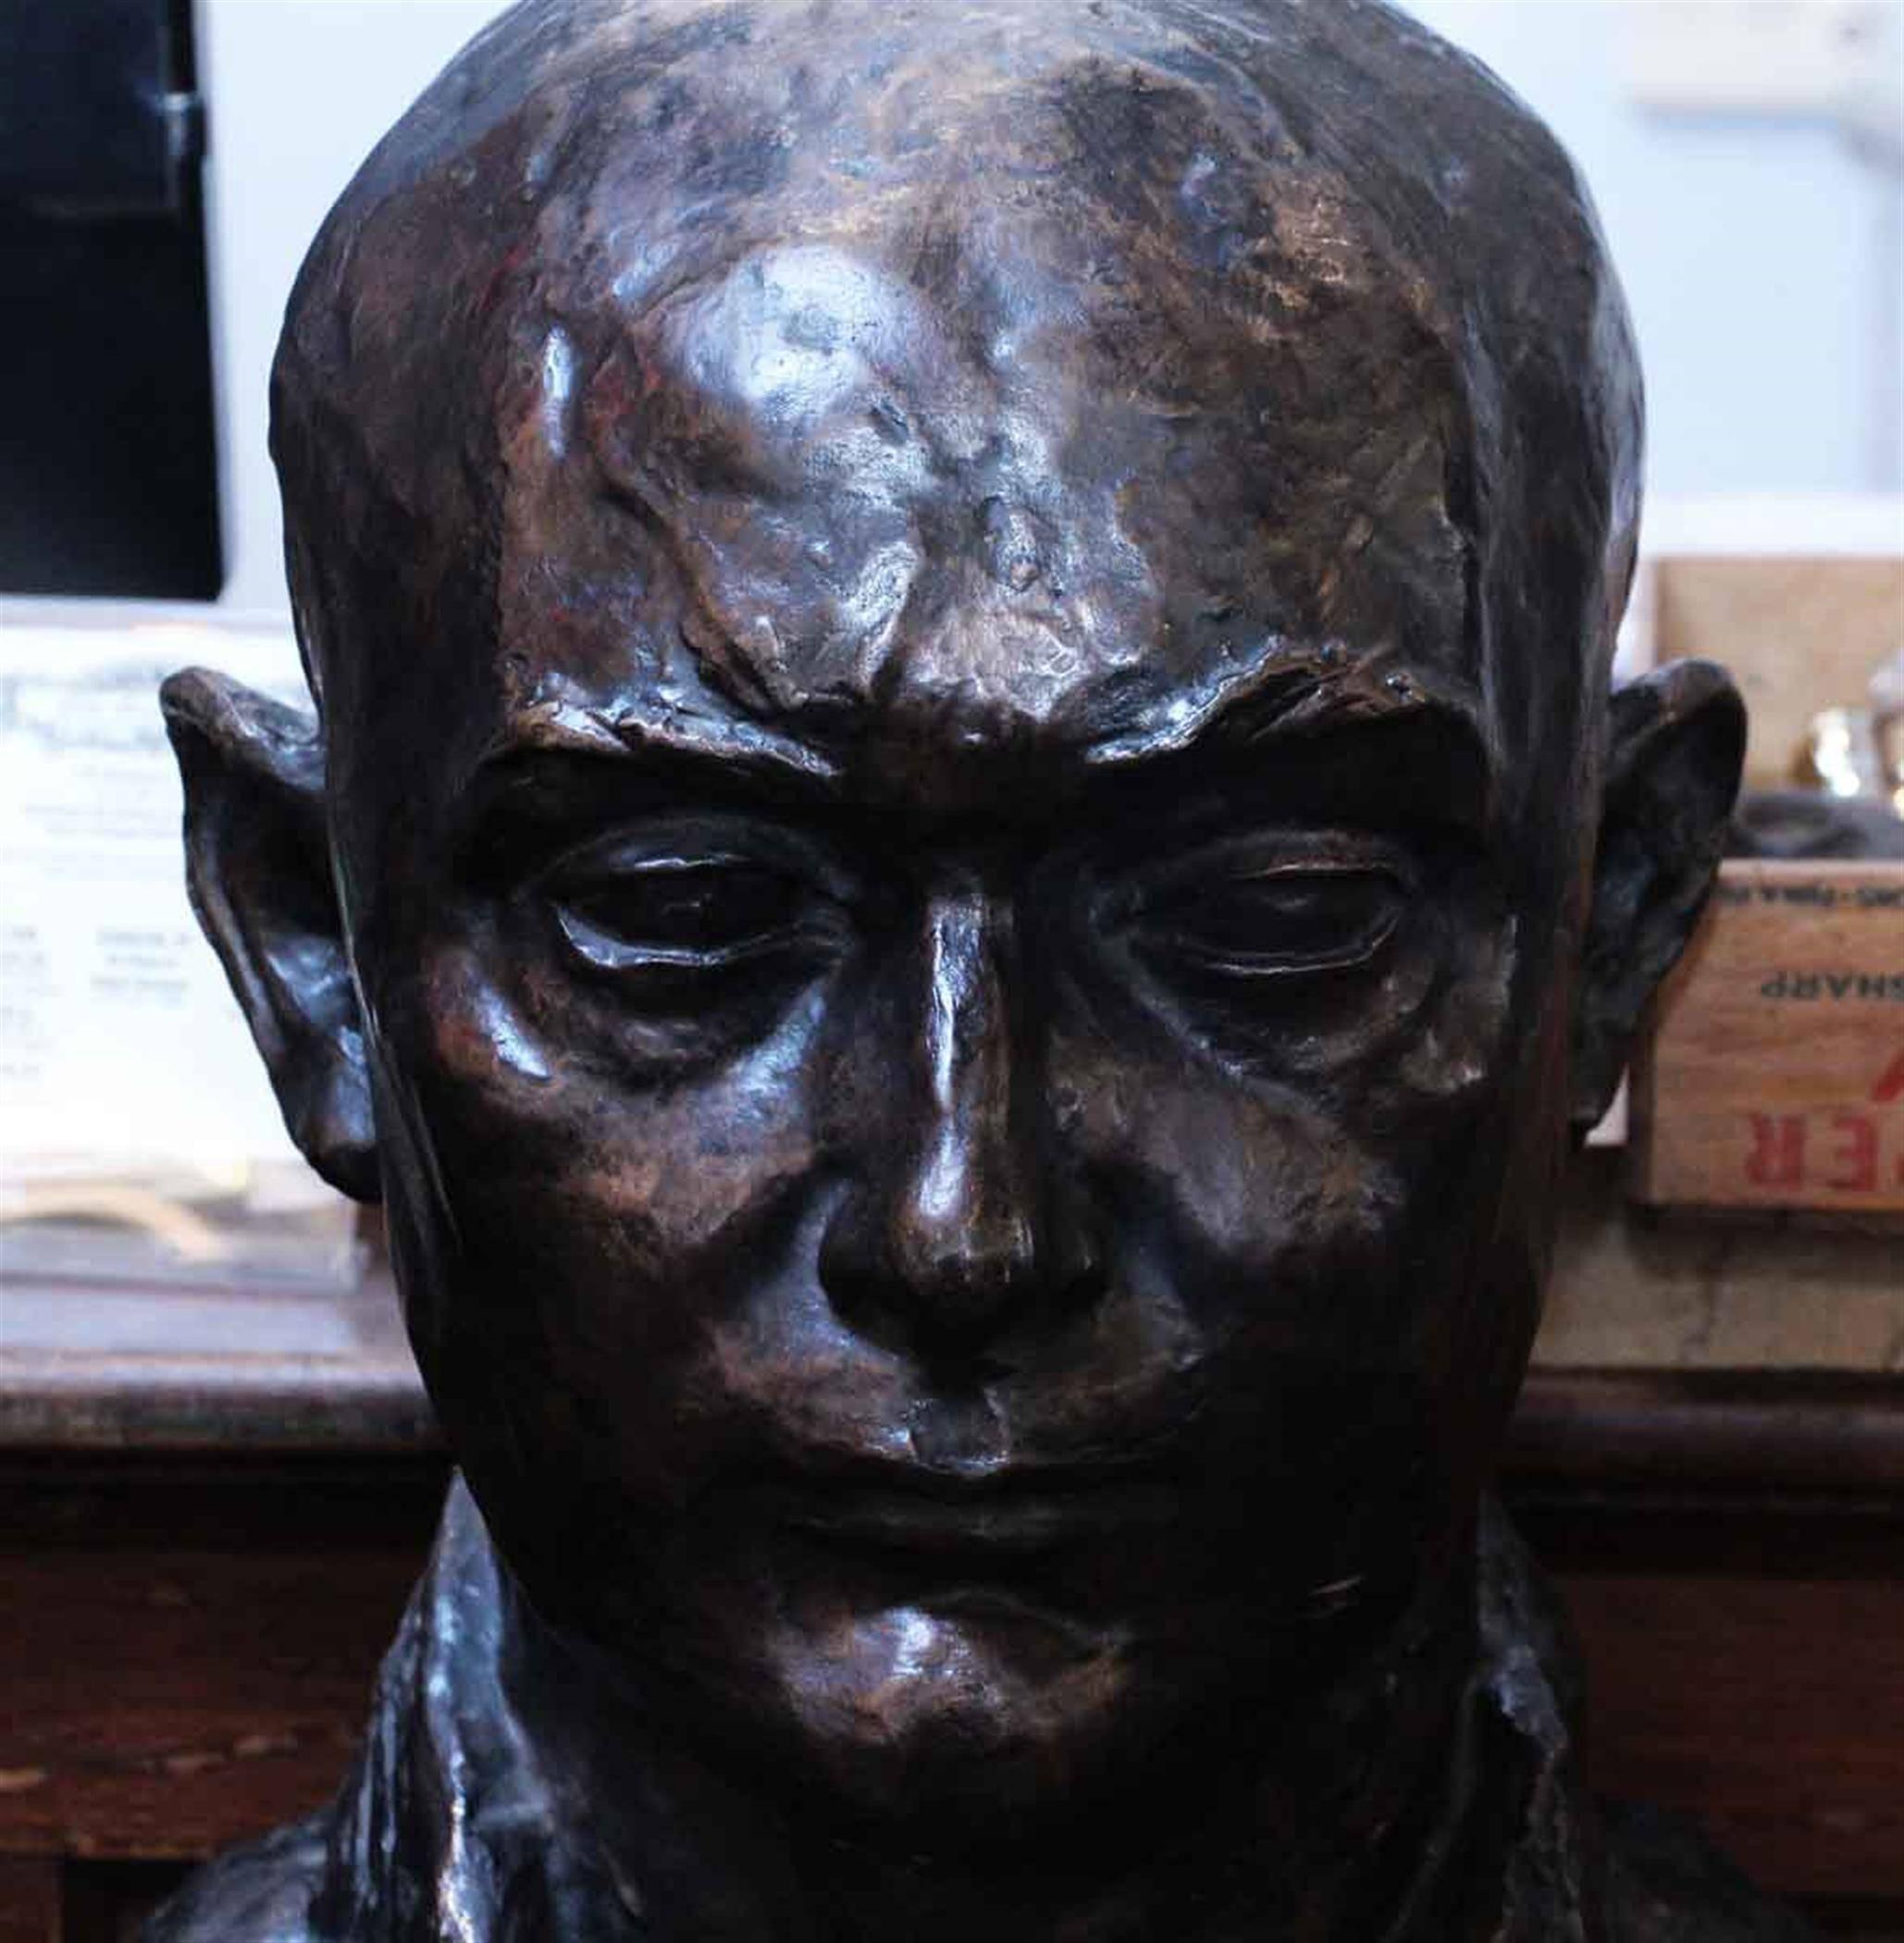 Large size bronze bust of an unidentified male figure. This can be seen at our 5 East 16th St location on Union Square in Manhattan.